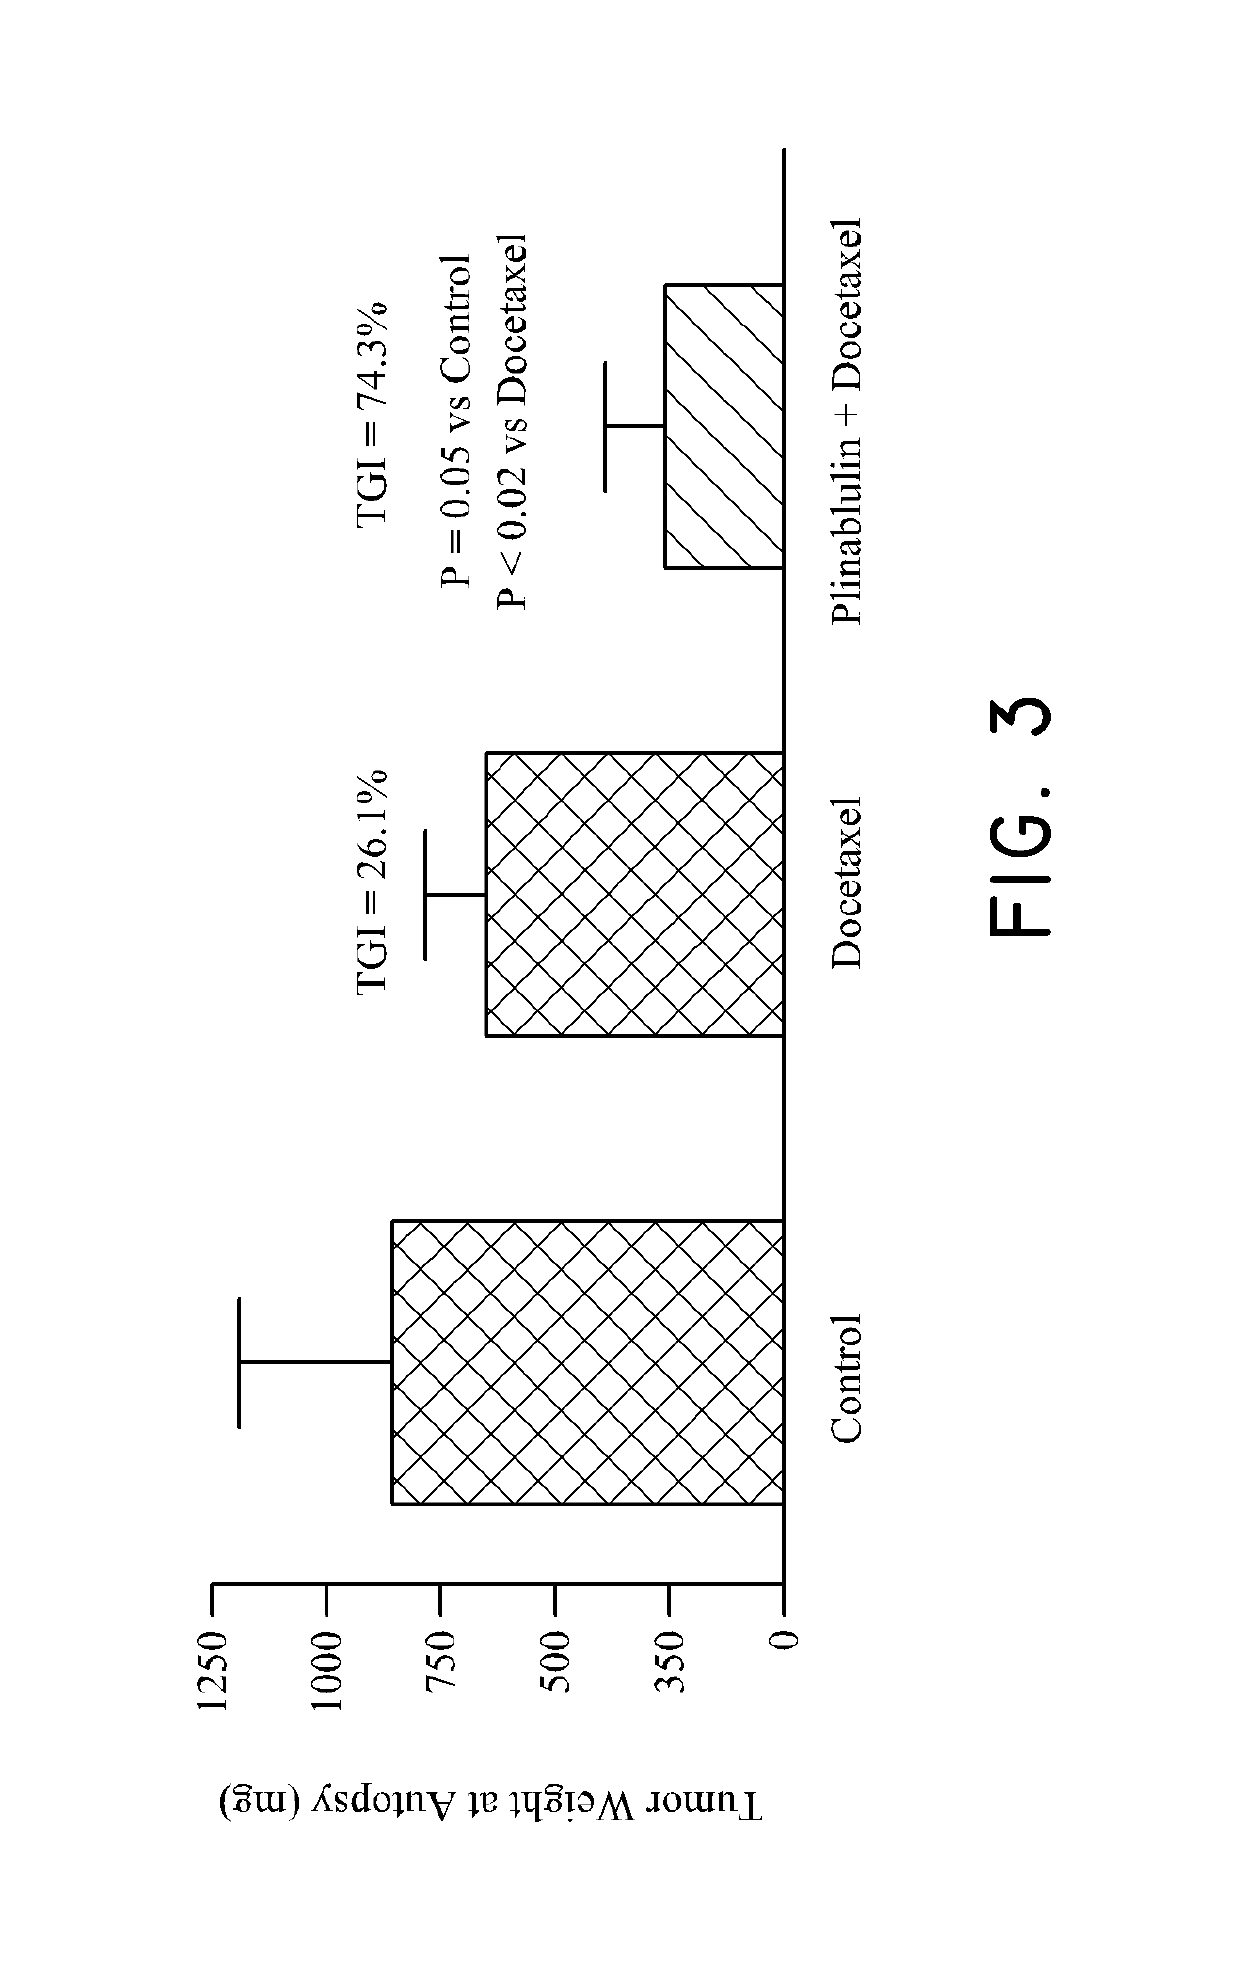 Method of treating cancer associated with a RAS mutation